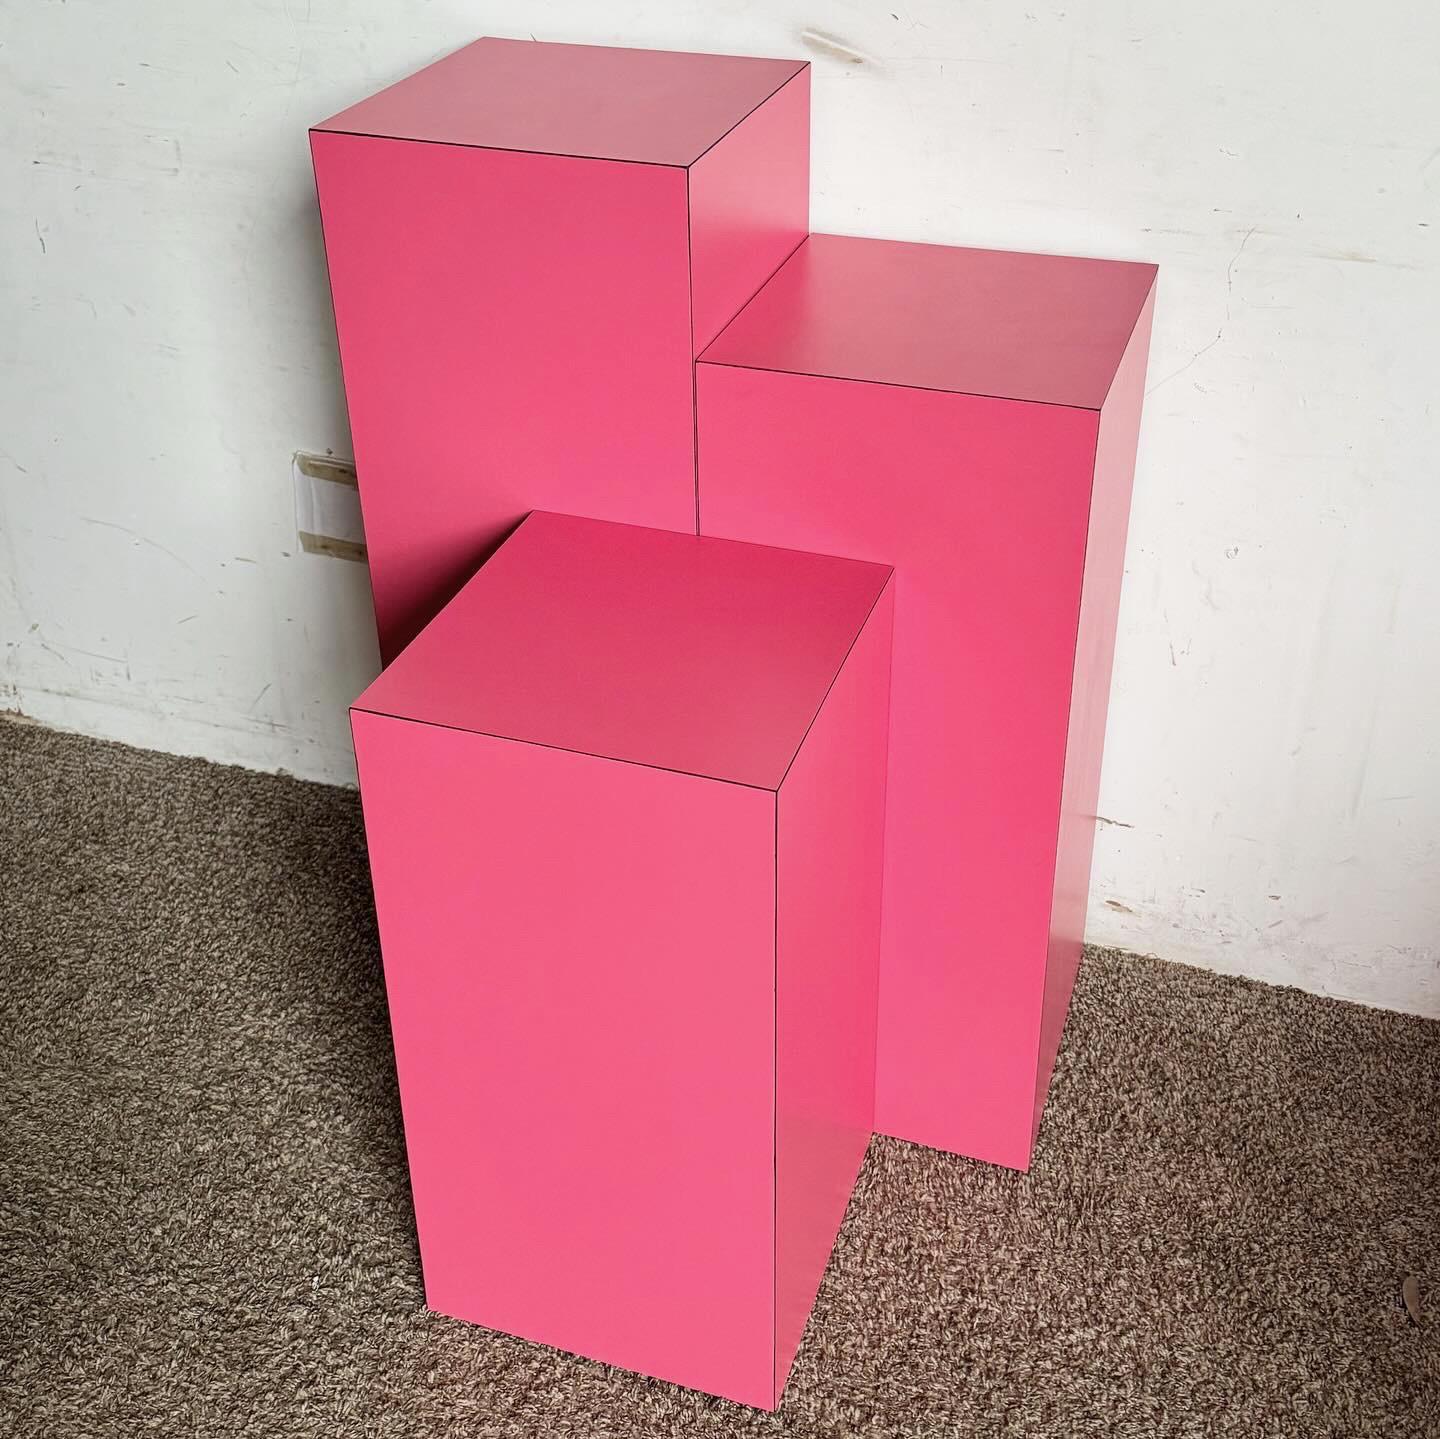 Brighten your home with the Postmodern Hot Pink Matte Laminate Ascending Rectangular Prism Pedestal Set Tables. This set of three, featuring vibrant hot pink finishes, adds a playful touch to any space. With ascending heights of 36.25‚Äù, 30.25‚Äù,